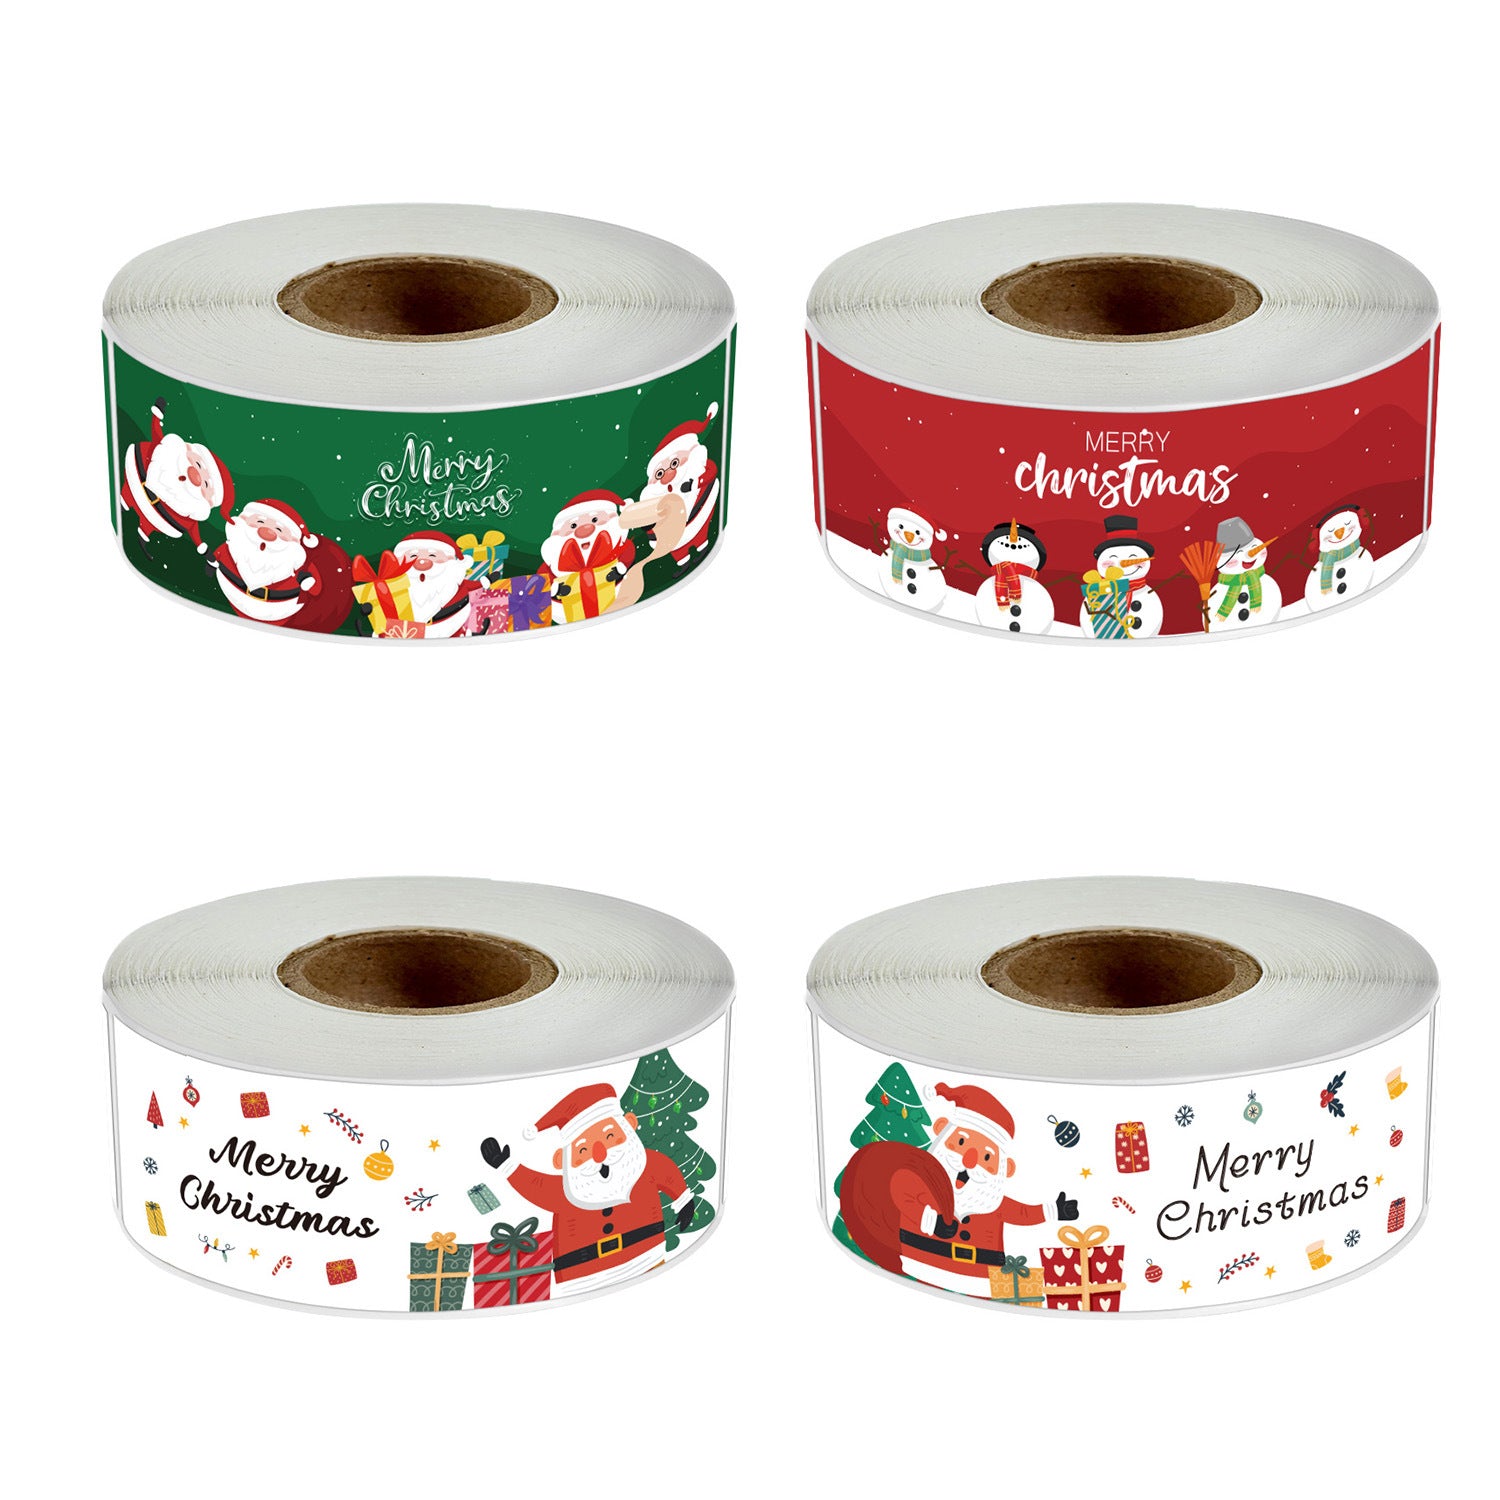 Christmas decorations, coated paper adhesive sticker, 120 SheetsRoll Red Christmas Strip Stickers, Christmas Sticker, 